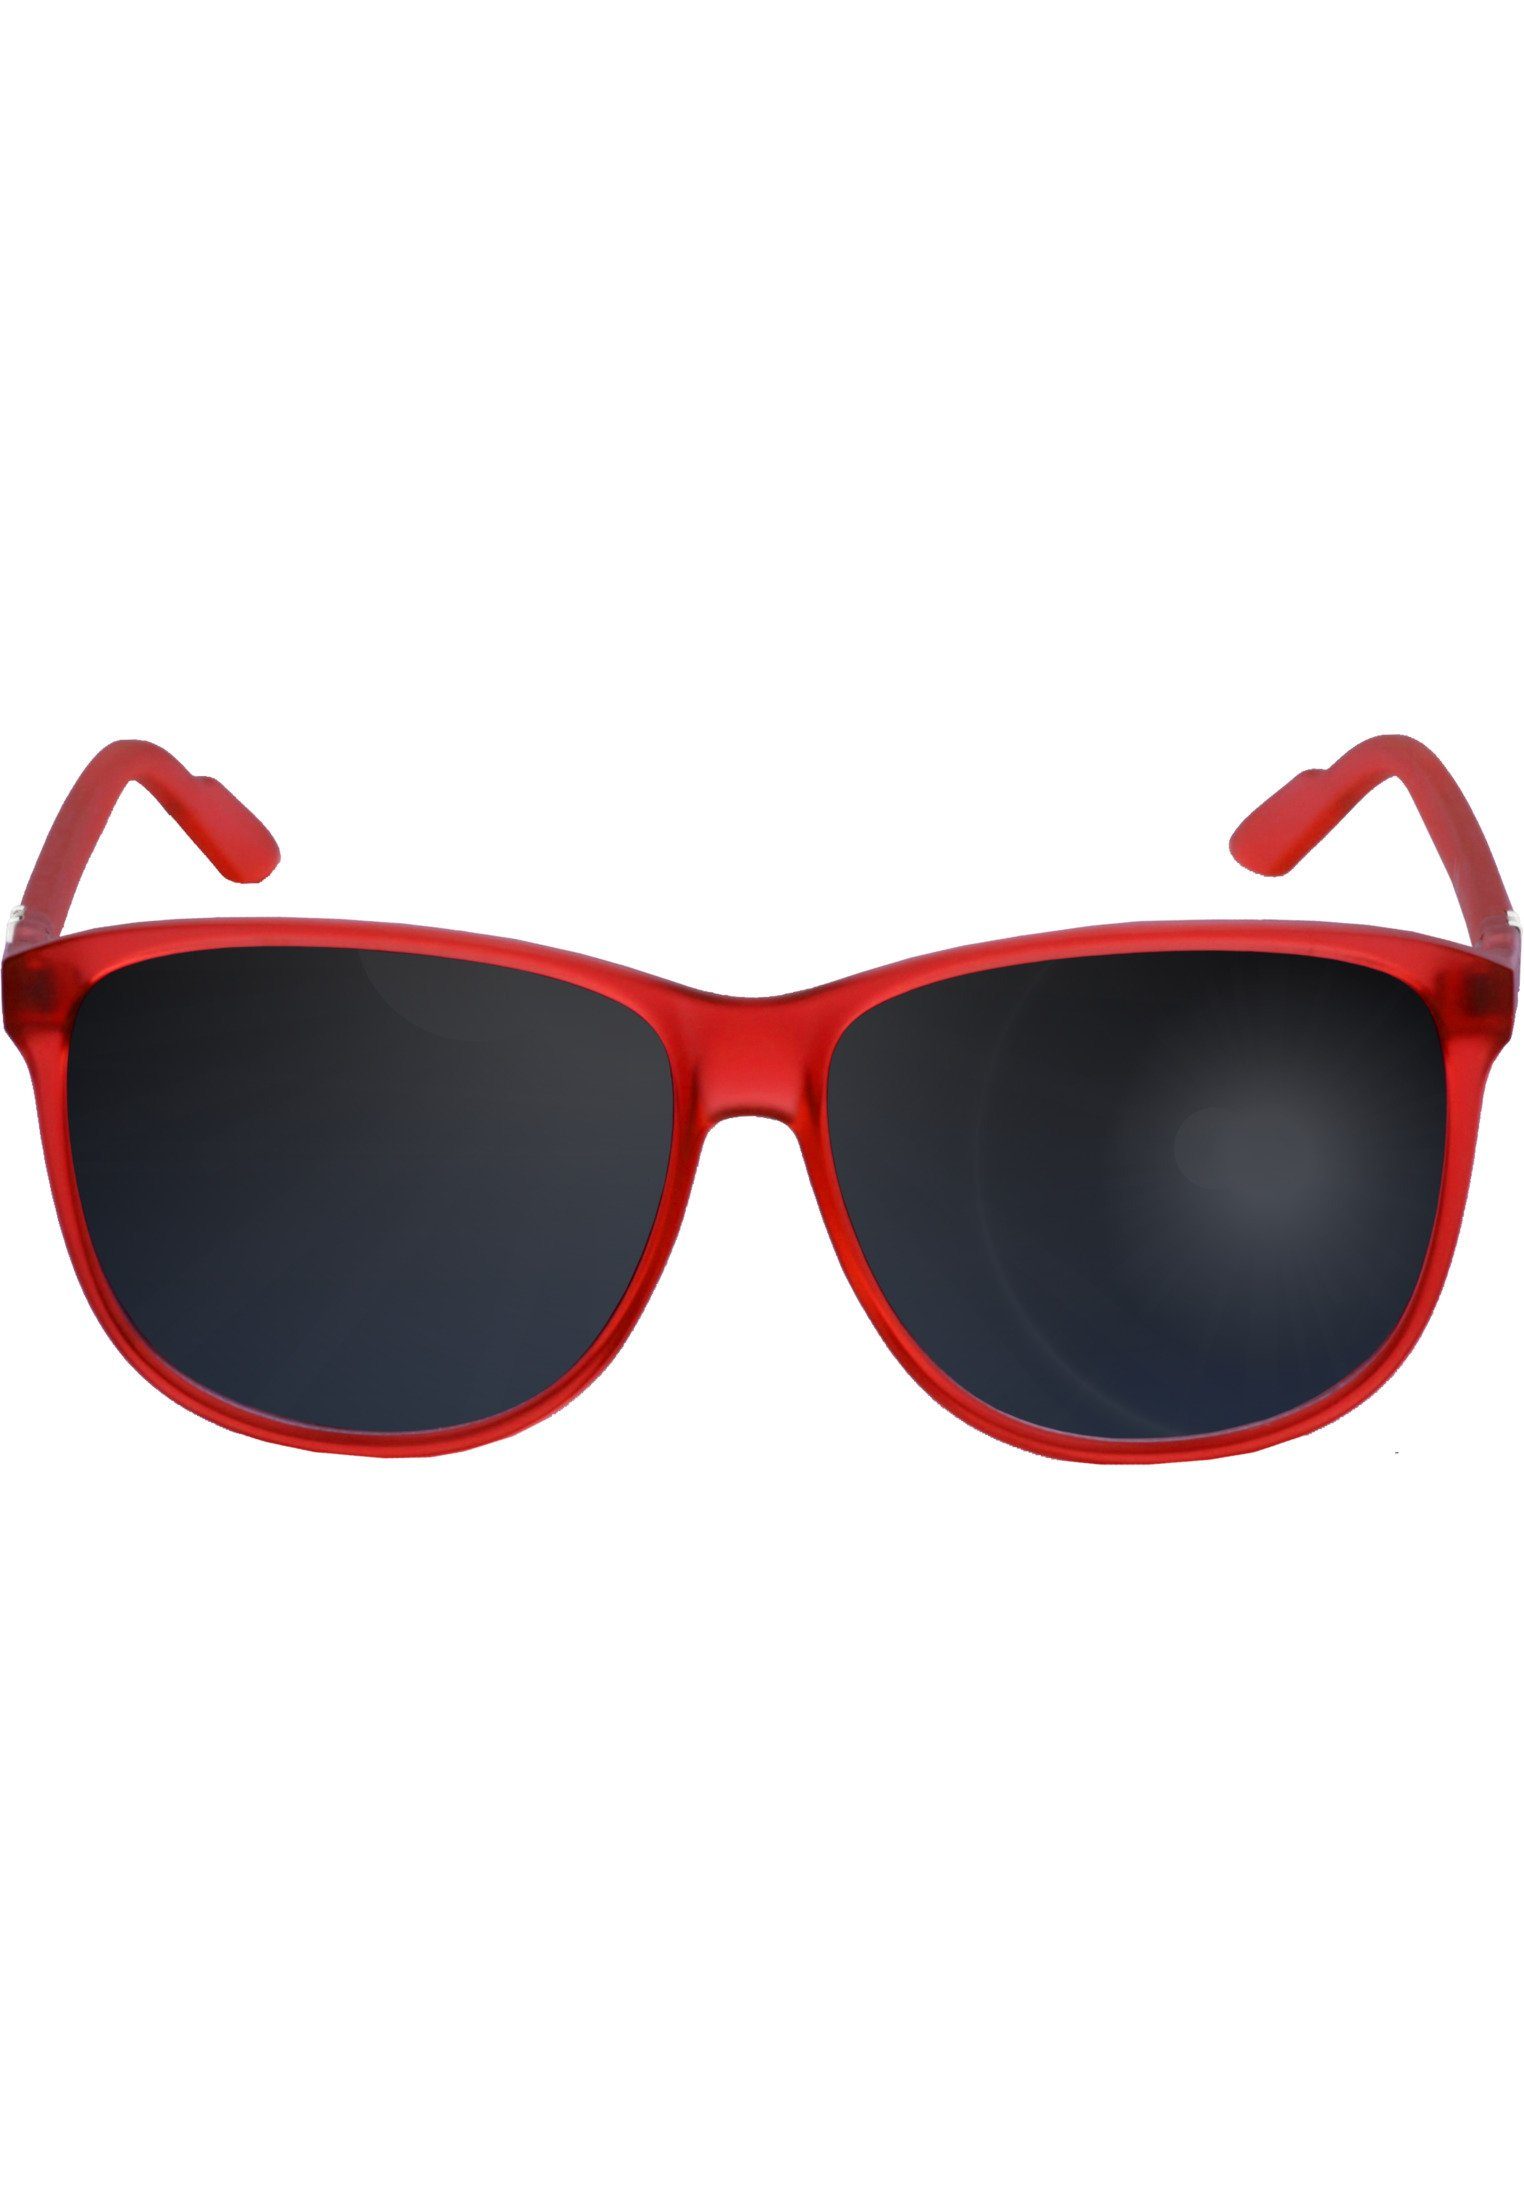 MSTRDS Sonnenbrille Accessoires Sunglasses Chirwa red